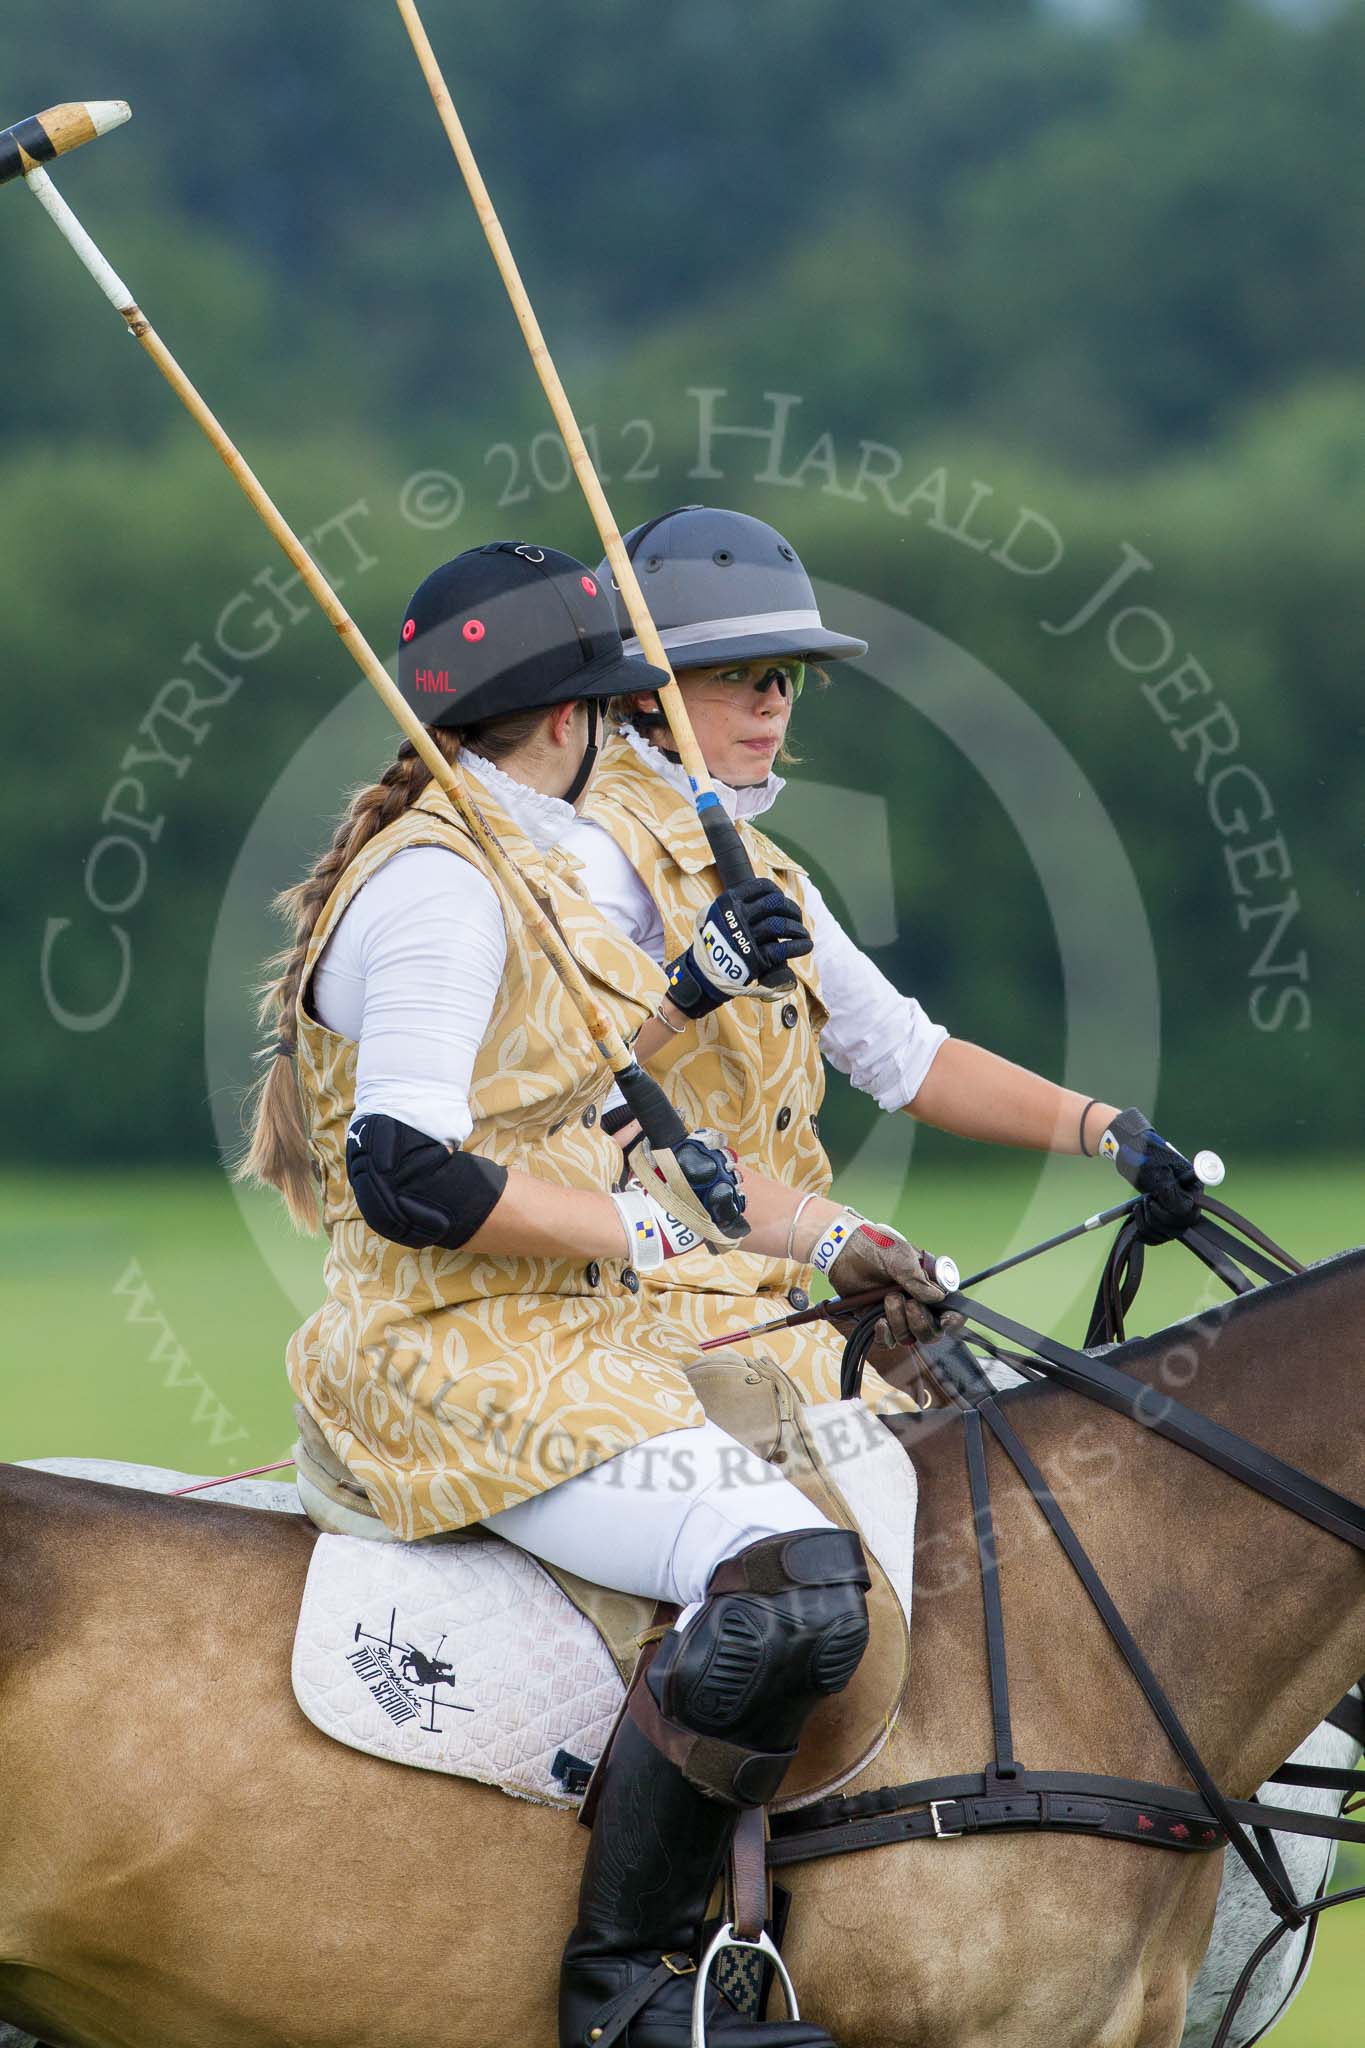 7th Heritage Polo Cup semi-finals: The Amazons of Polo Team sponsored by Polistas - Heloise Lorentzen (1) GB/BRA..
Hurtwood Park Polo Club,
Ewhurst Green,
Surrey,
United Kingdom,
on 04 August 2012 at 12:57, image #91